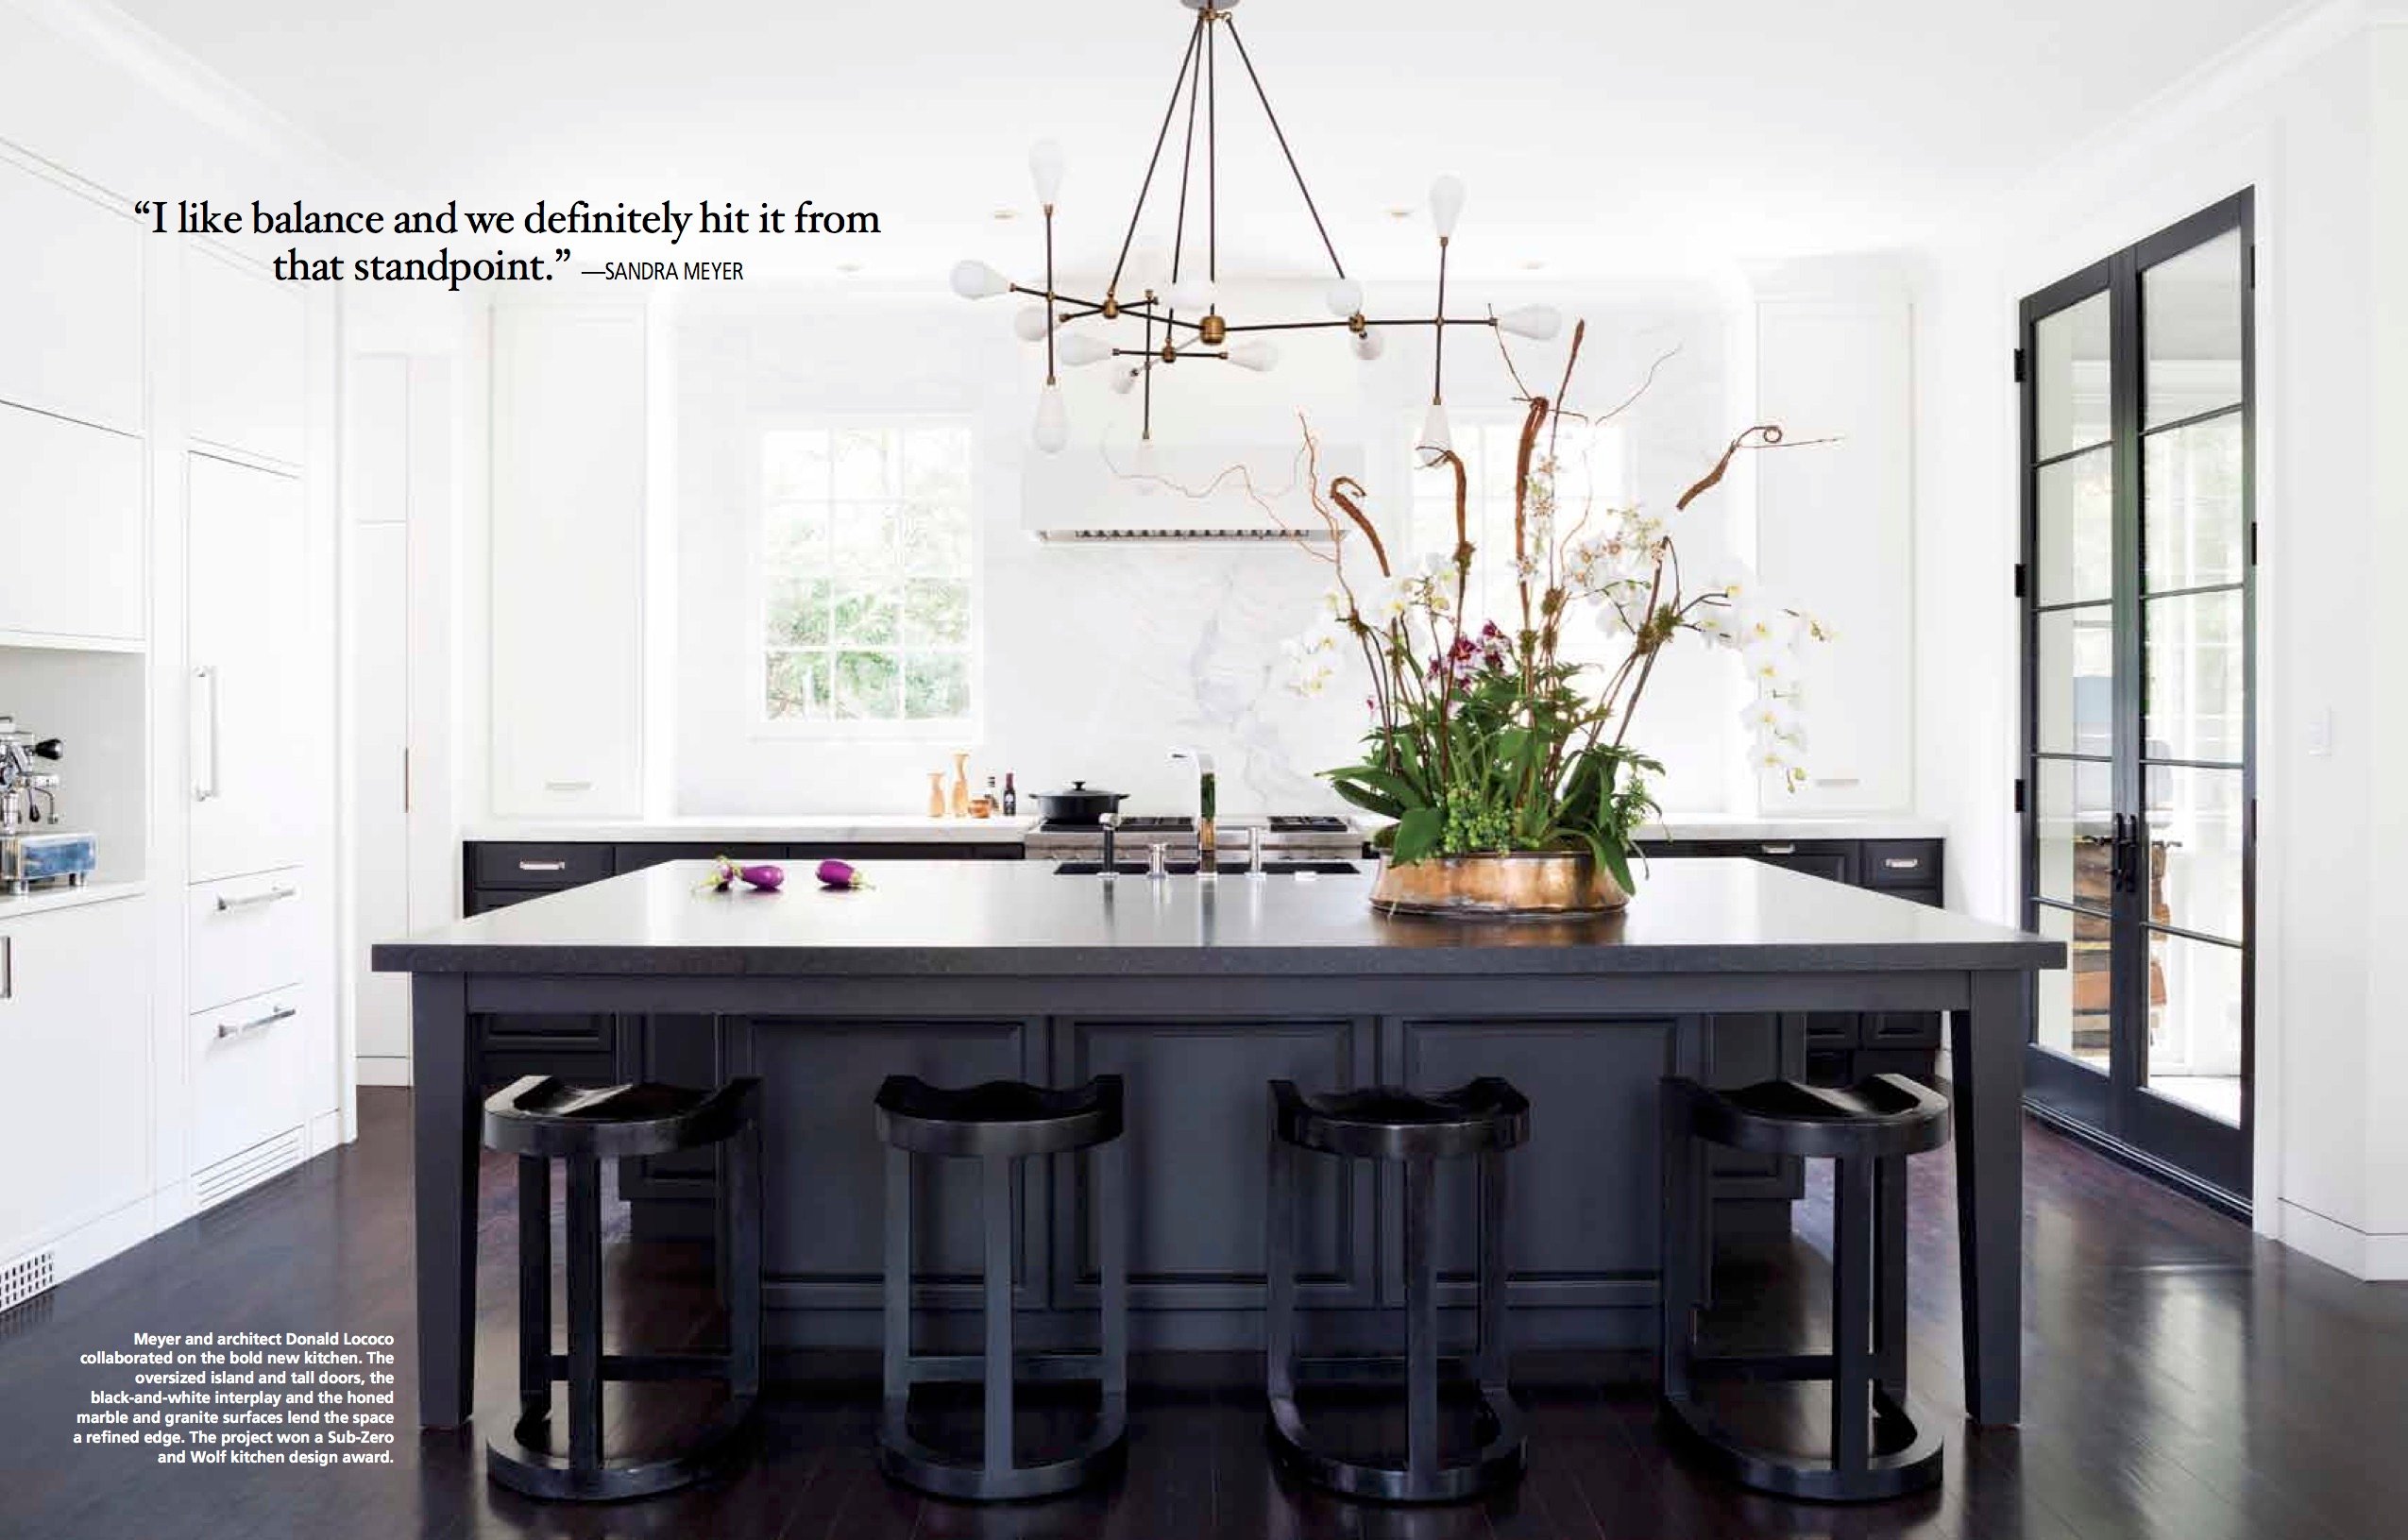 A tear sheet from Home & Design showcasing a kitchen interior with a kitchen island with flowers on top of it. Photo by Stacy Zarin Goldberg,